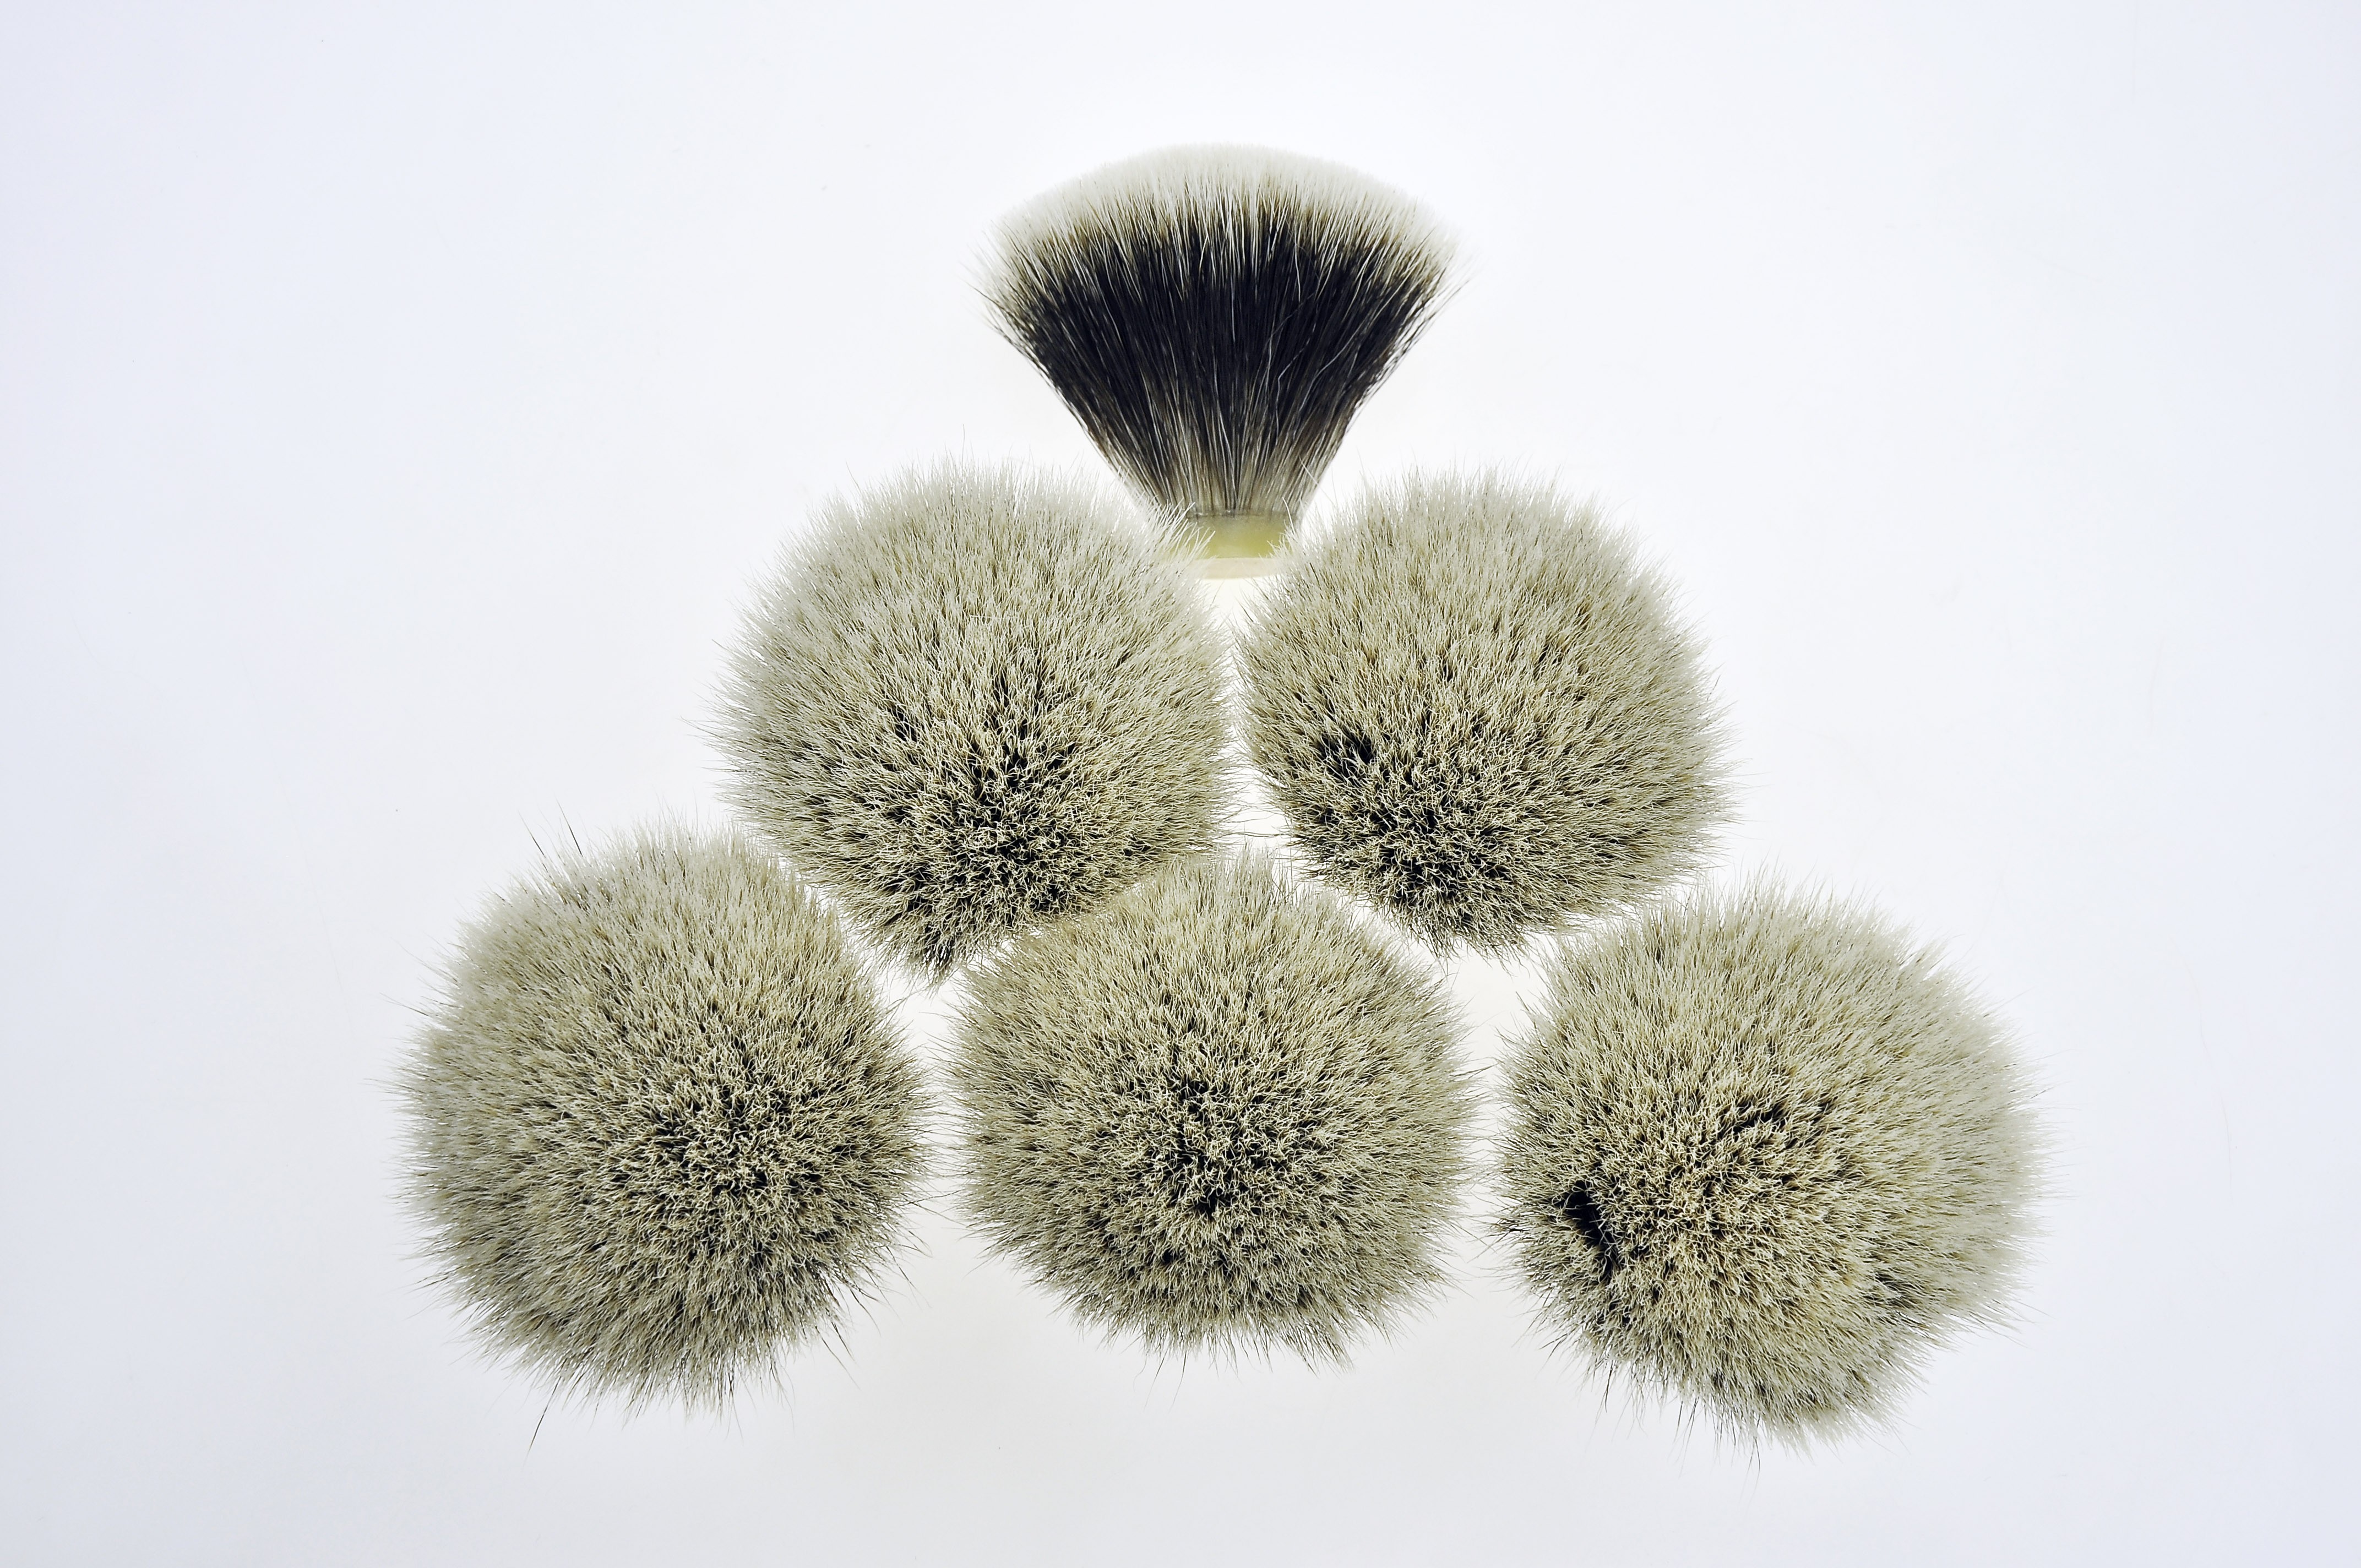 SHD Finest Two Band Manchuria Super Density  Two Band Badger Hair Knot OUMO BRUSH Shaving Tool